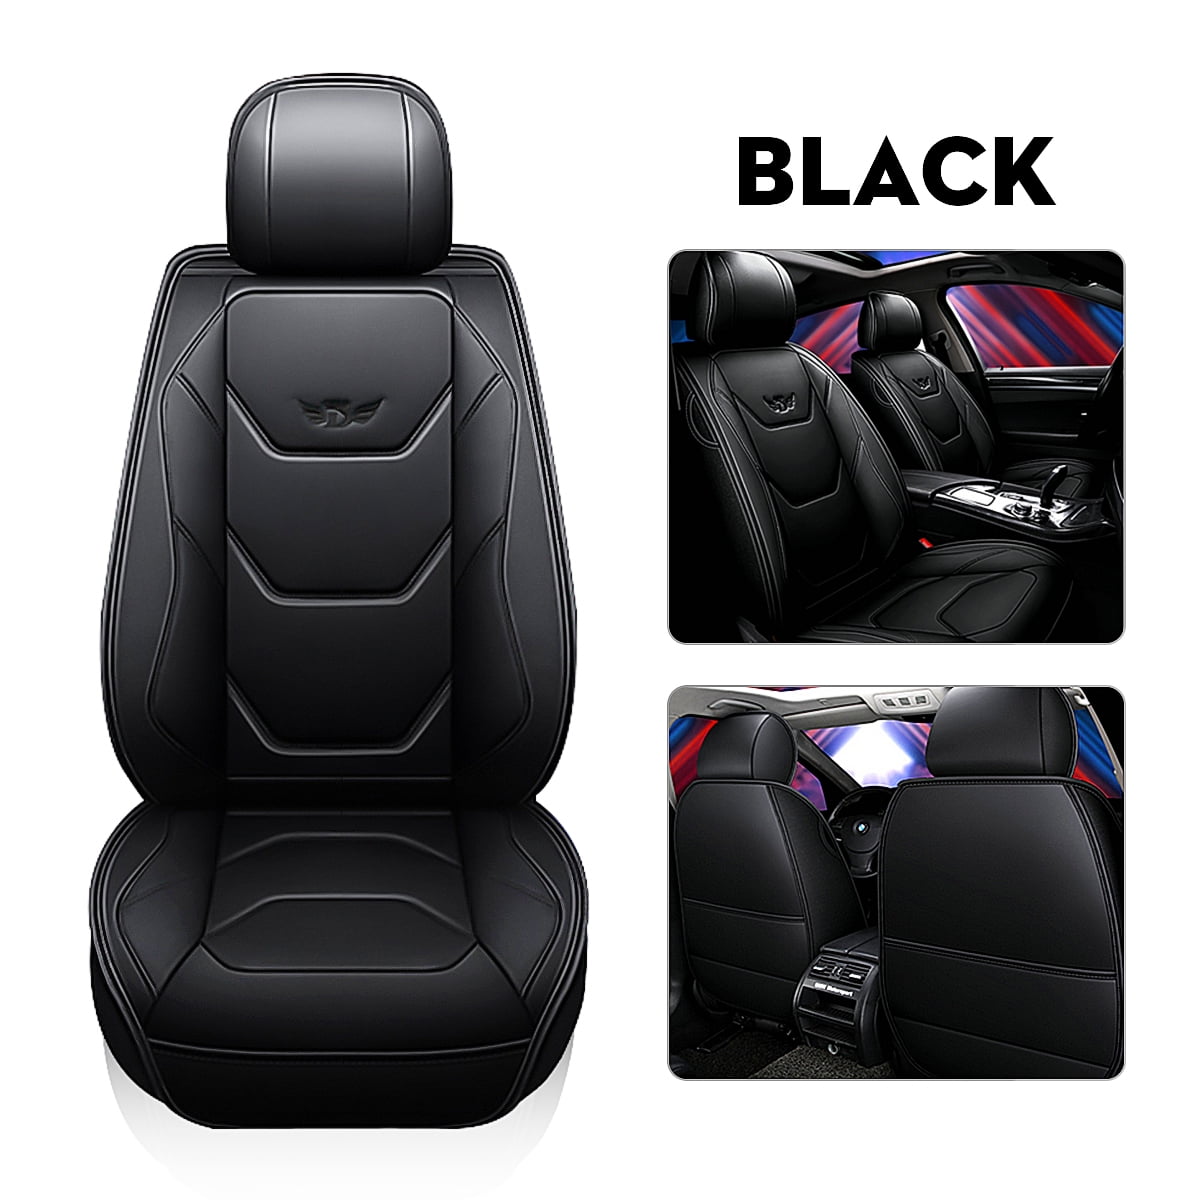 Easy to Install Universal Fit for Auto Truck Van SUV Car Seat Protectors Accessories,1 PCS Car Seat Covers Guns N Roses Full Set Front Car Seat Covers